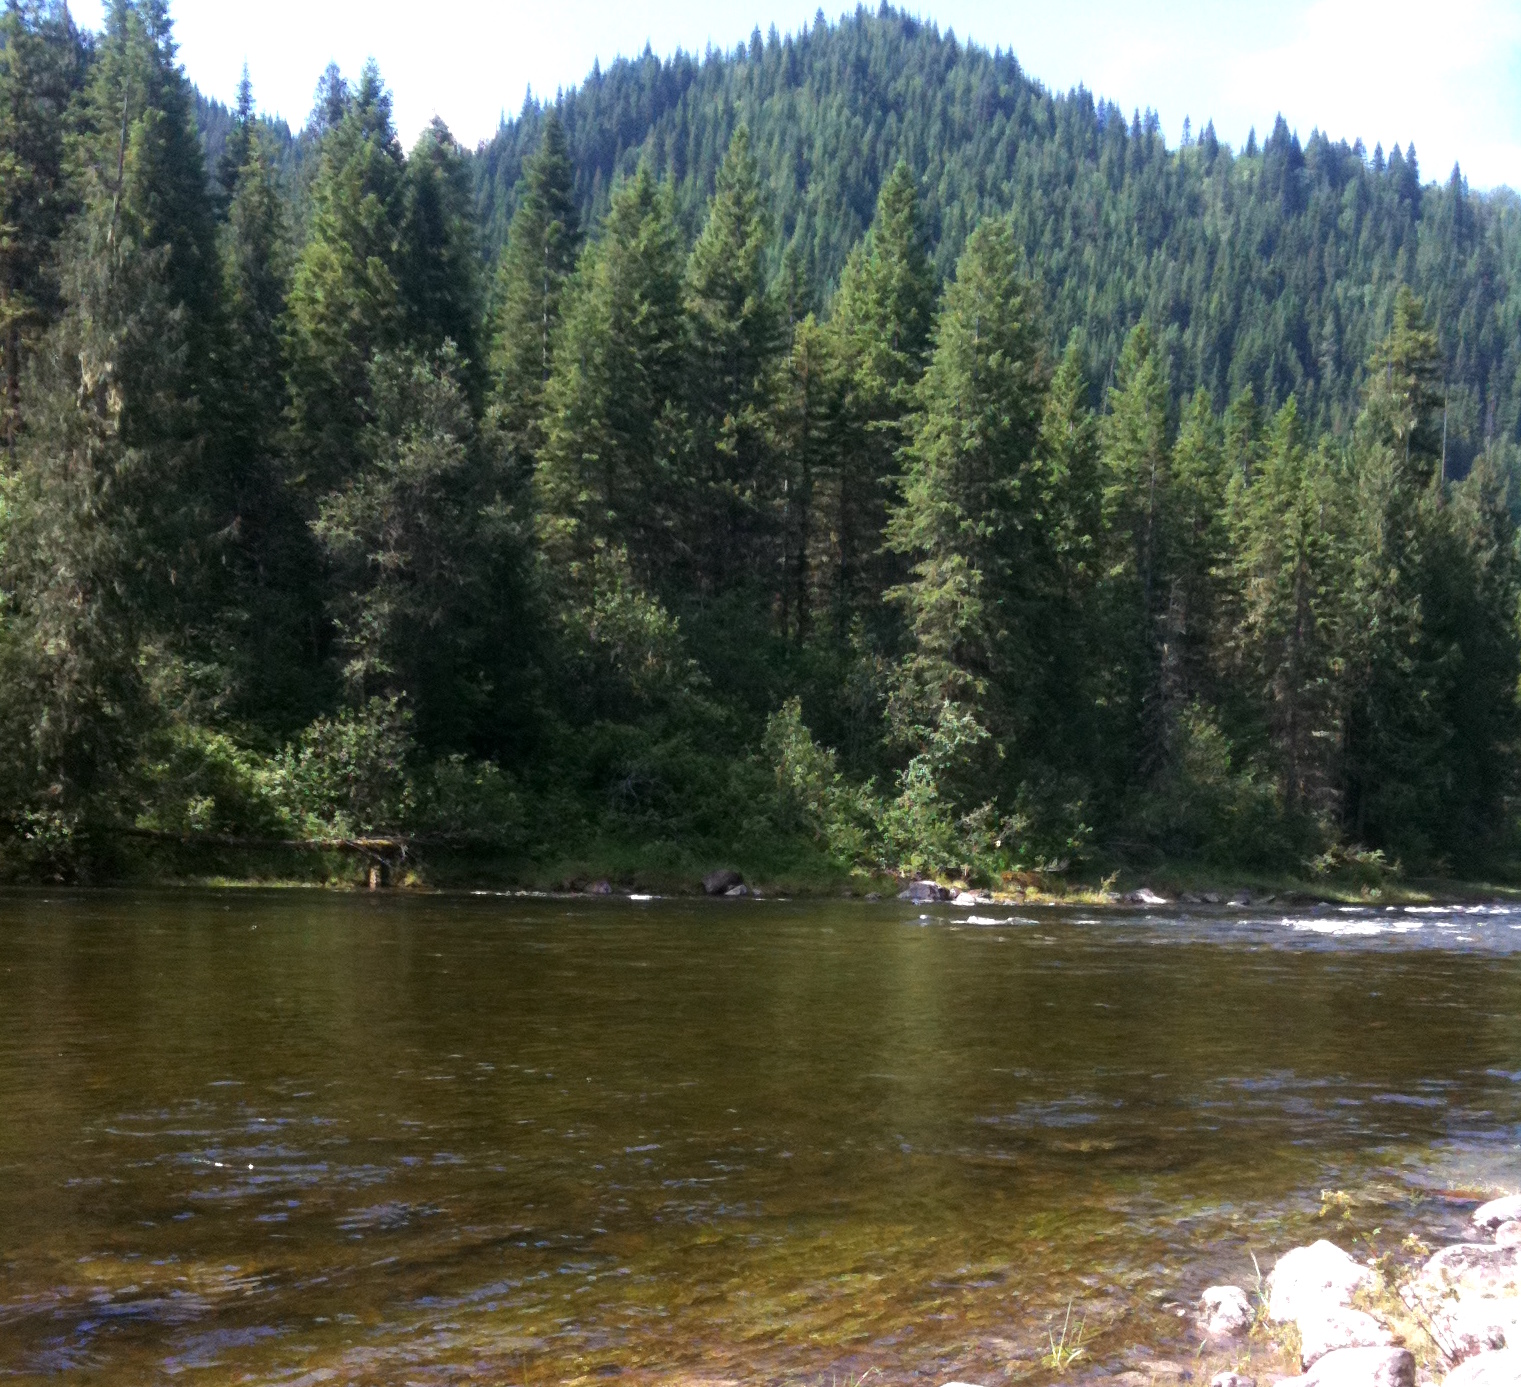 The Clearwater river